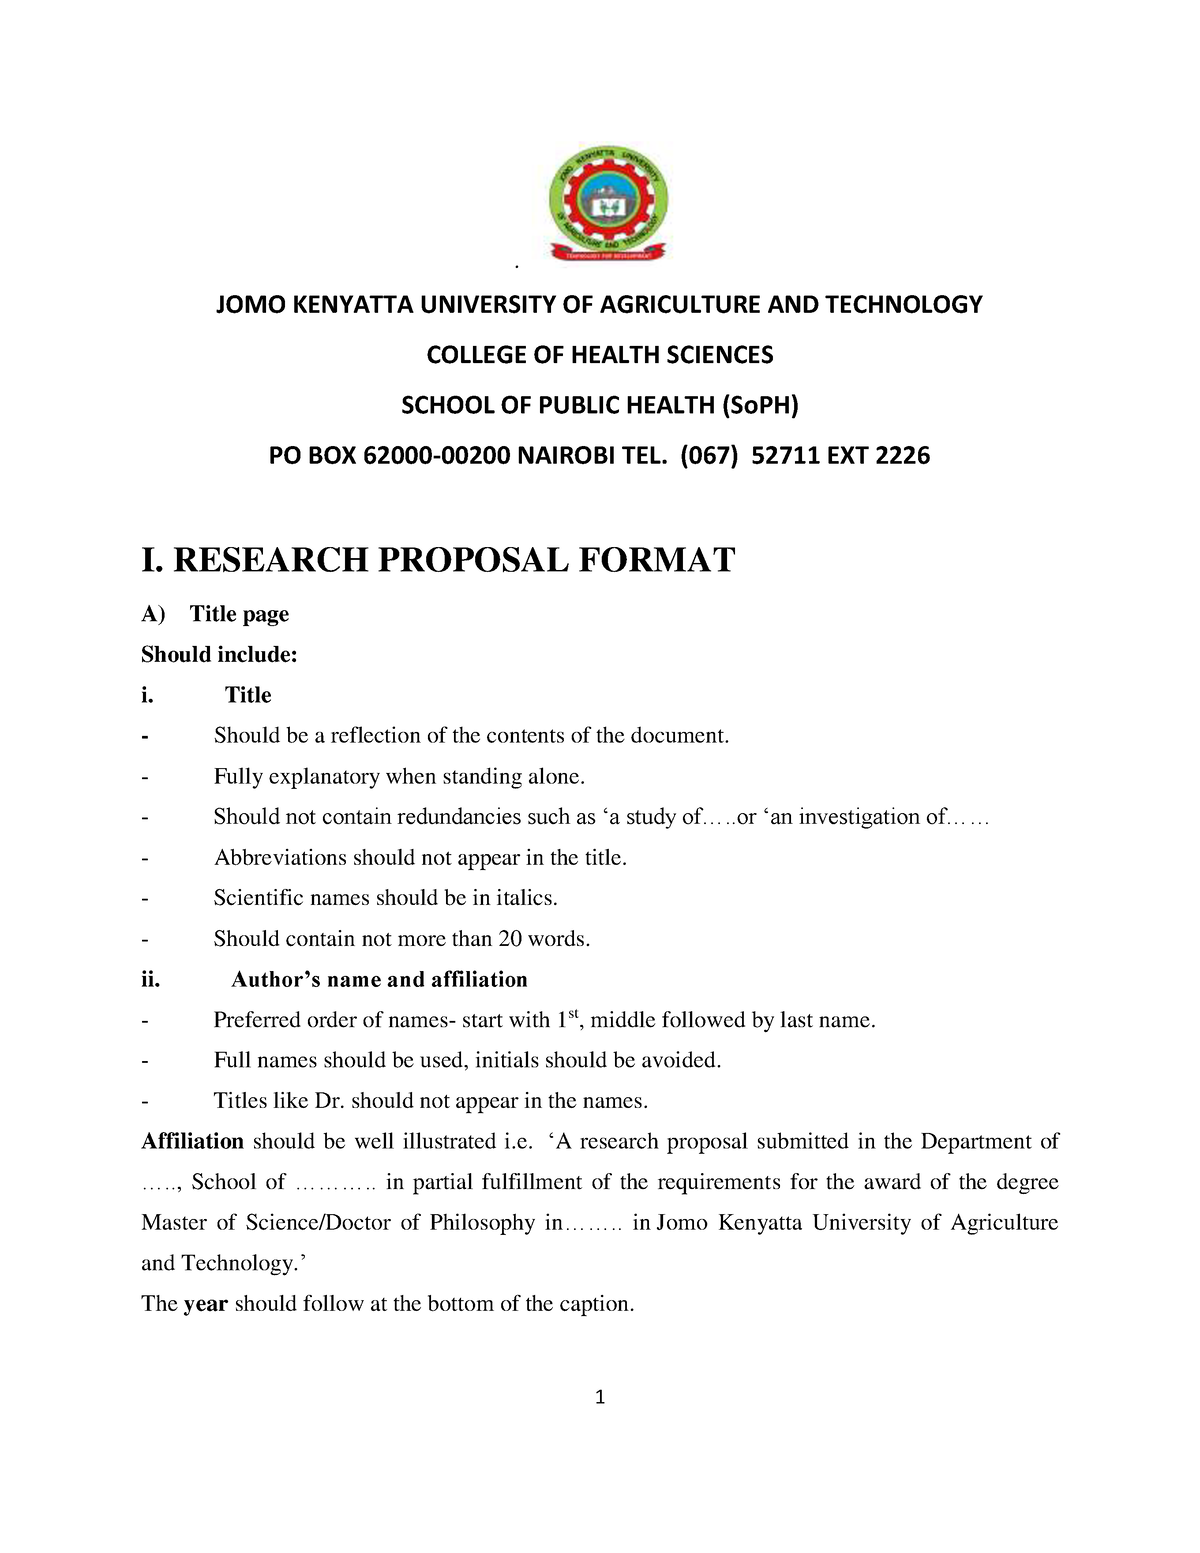 university of ghana research proposal format